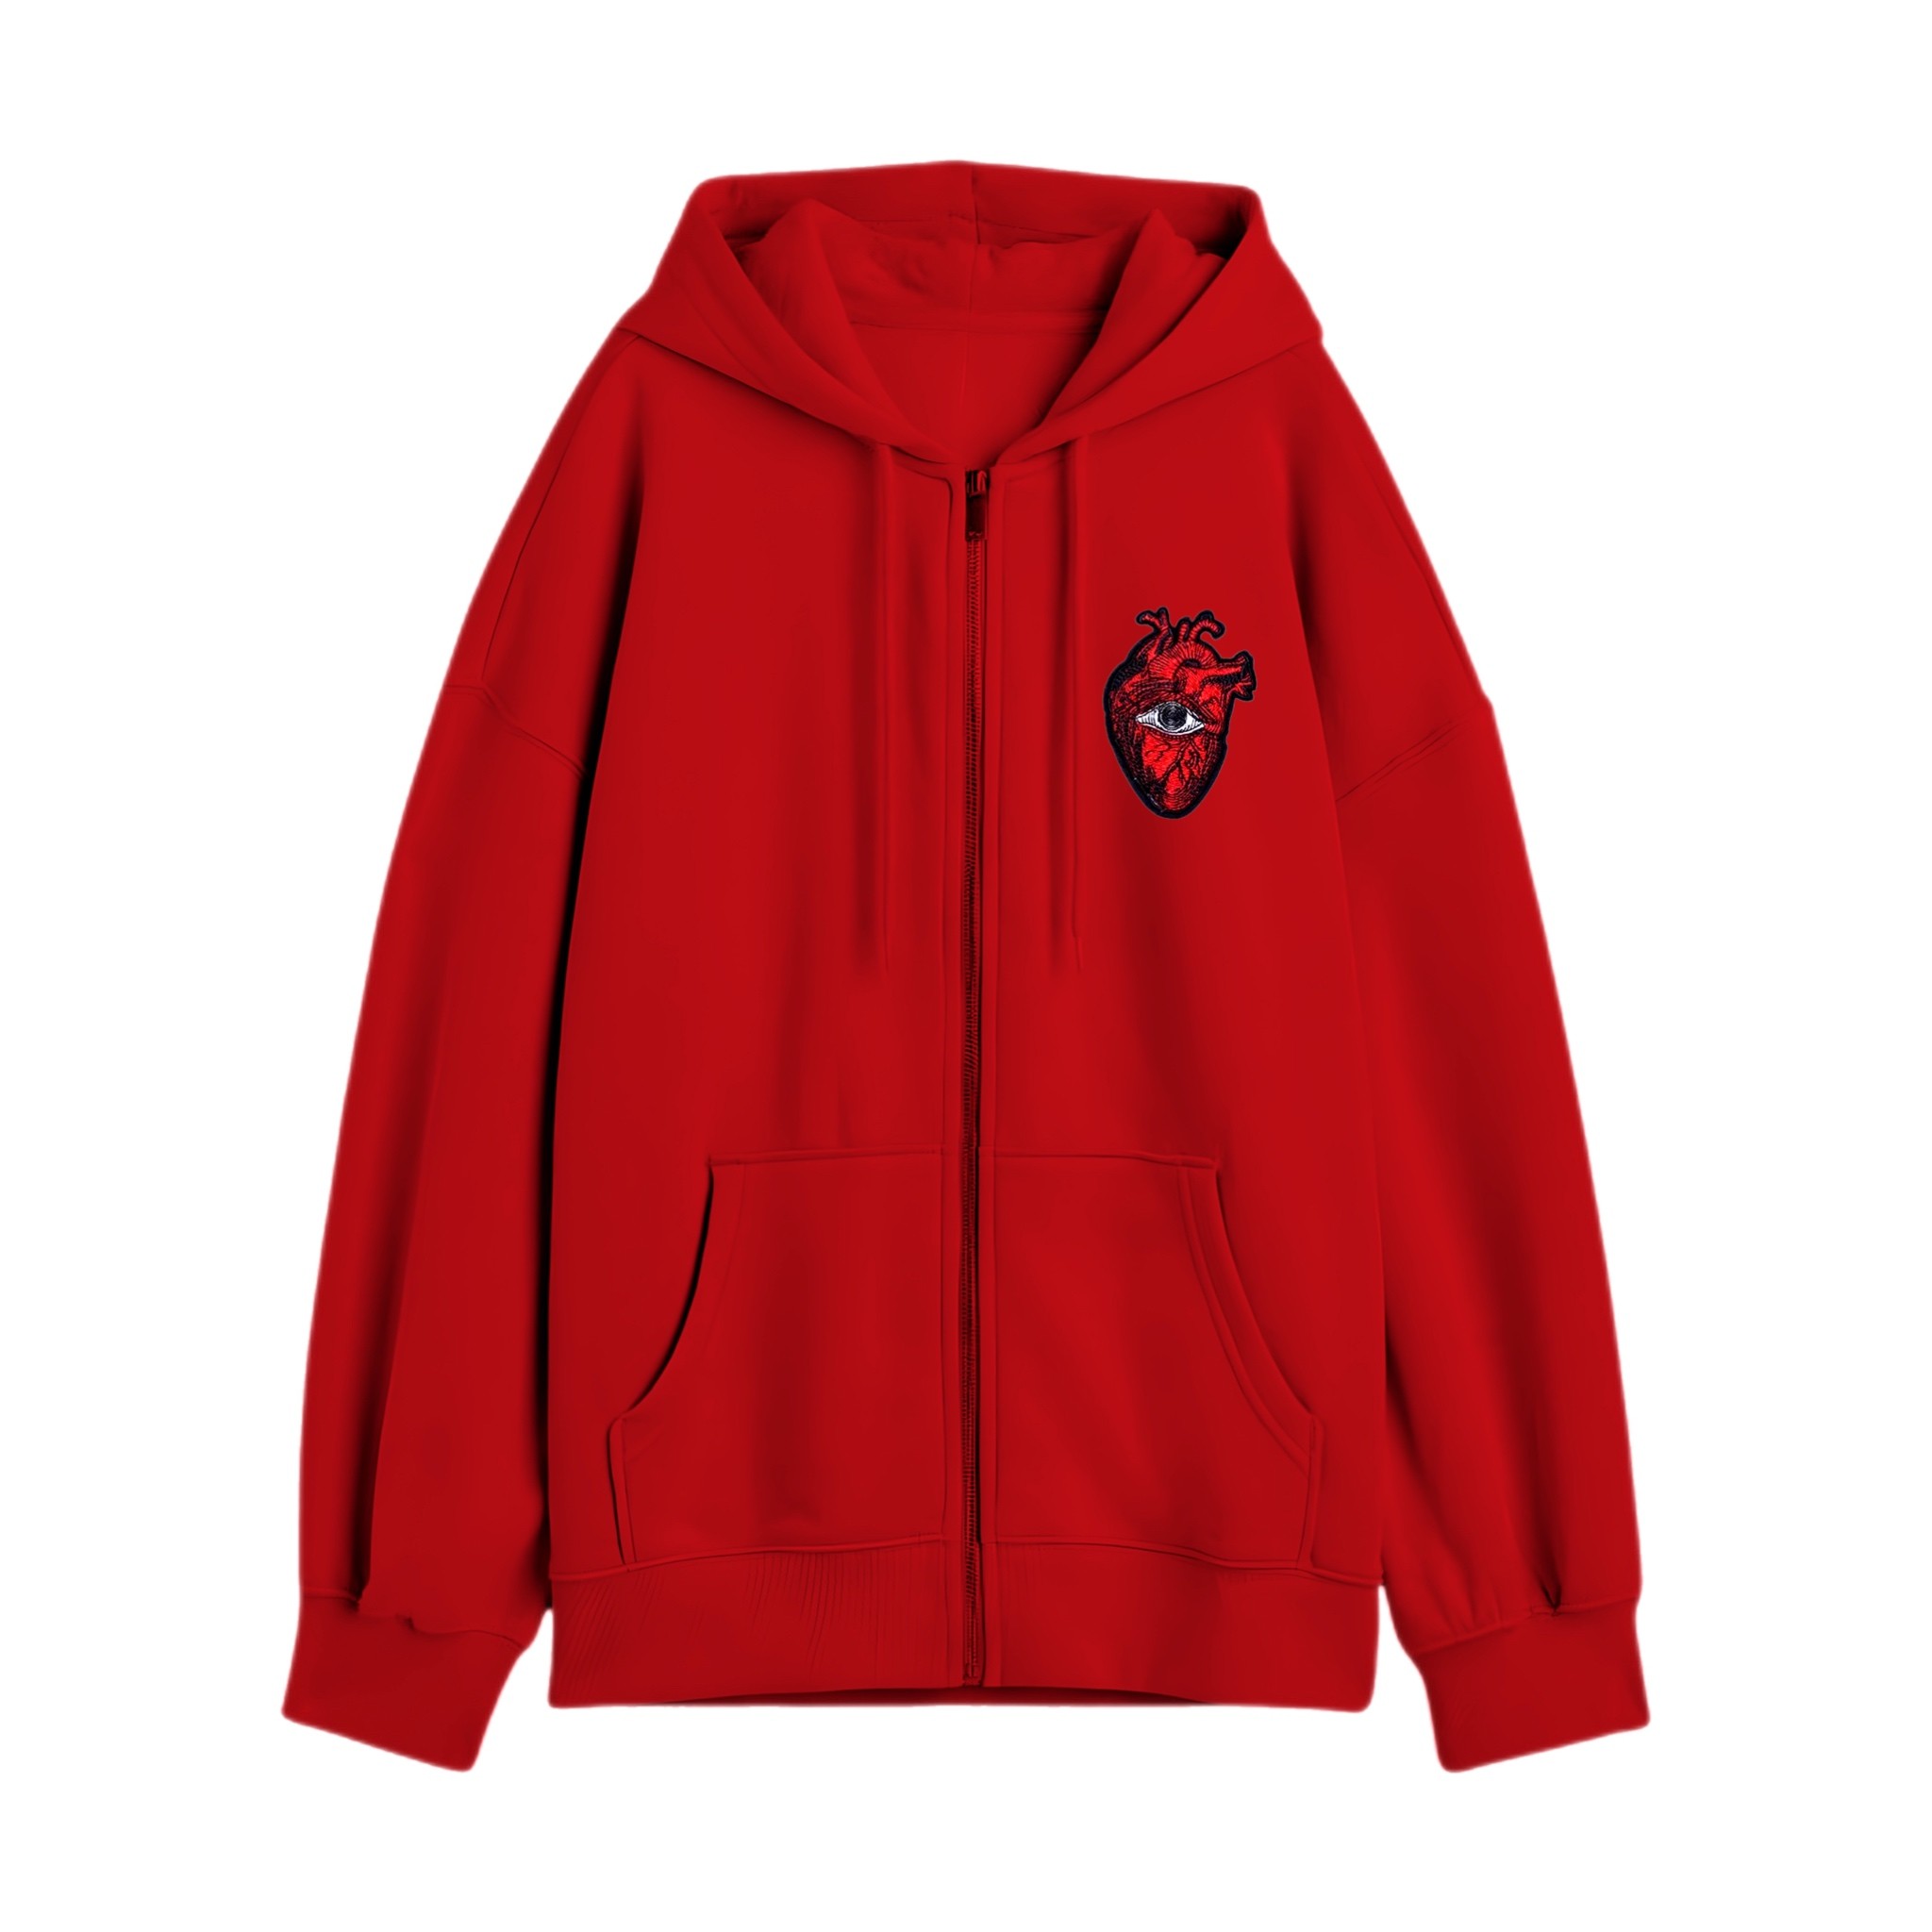 THIRD EYE patched zipped regular fit hoodie